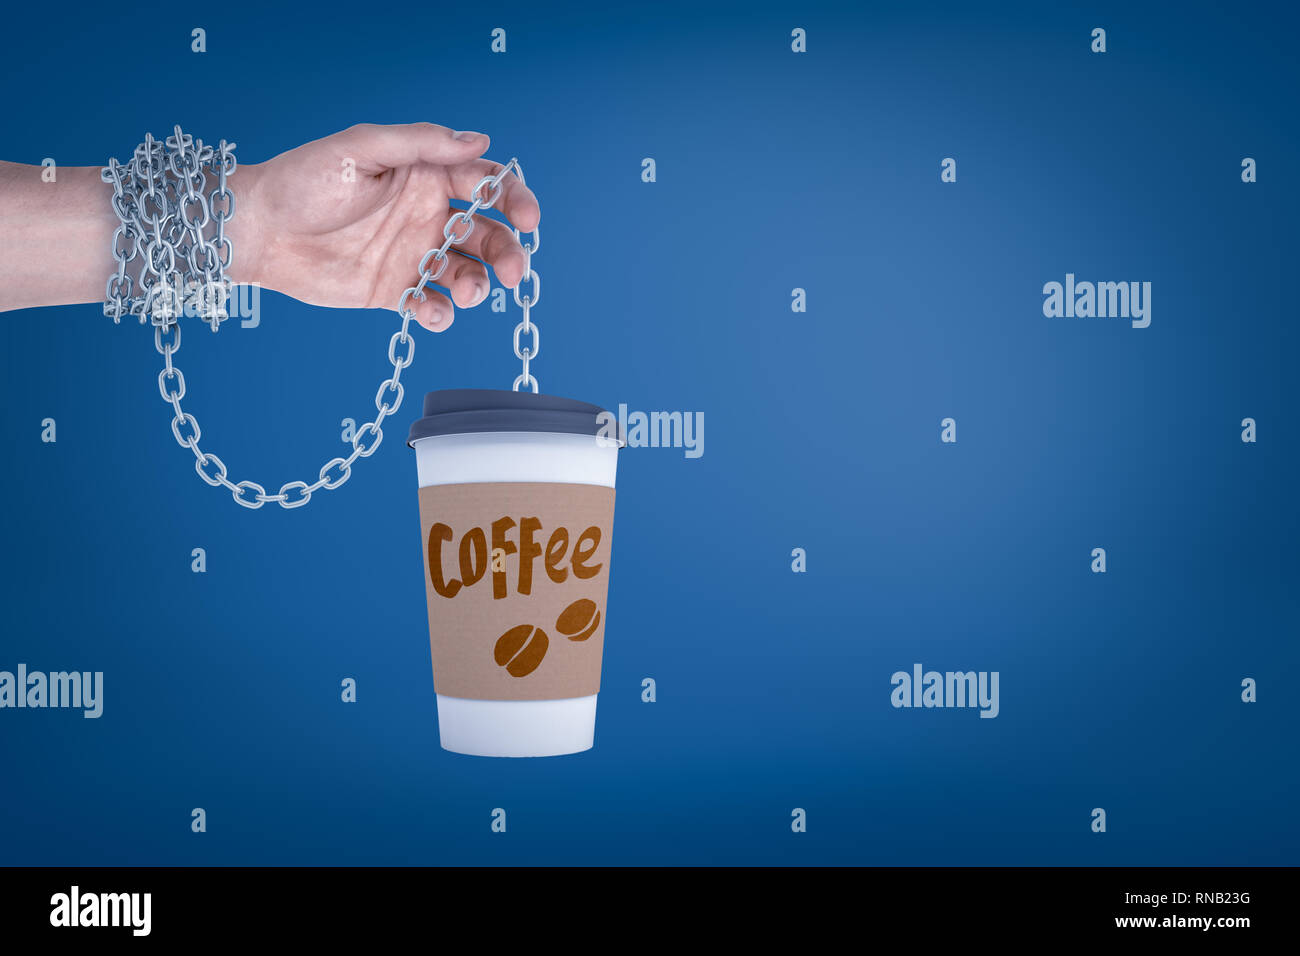 Close-up of hand holding coffee paper cup on metal chain which is also wrapped around wrist. Stock Photo